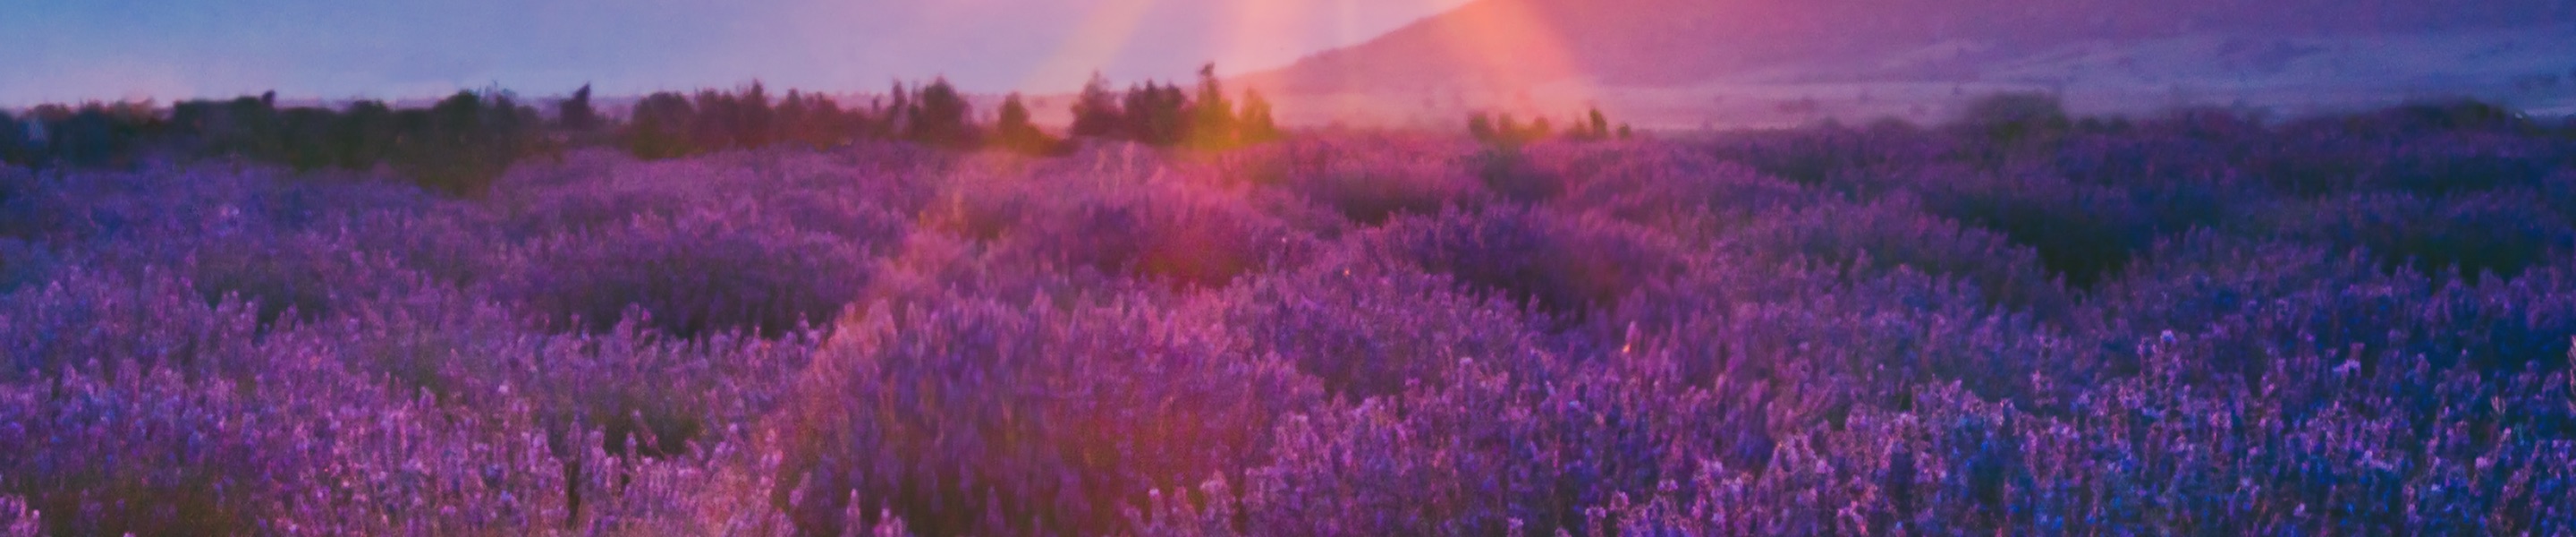 Sunset over a field of purple flowers